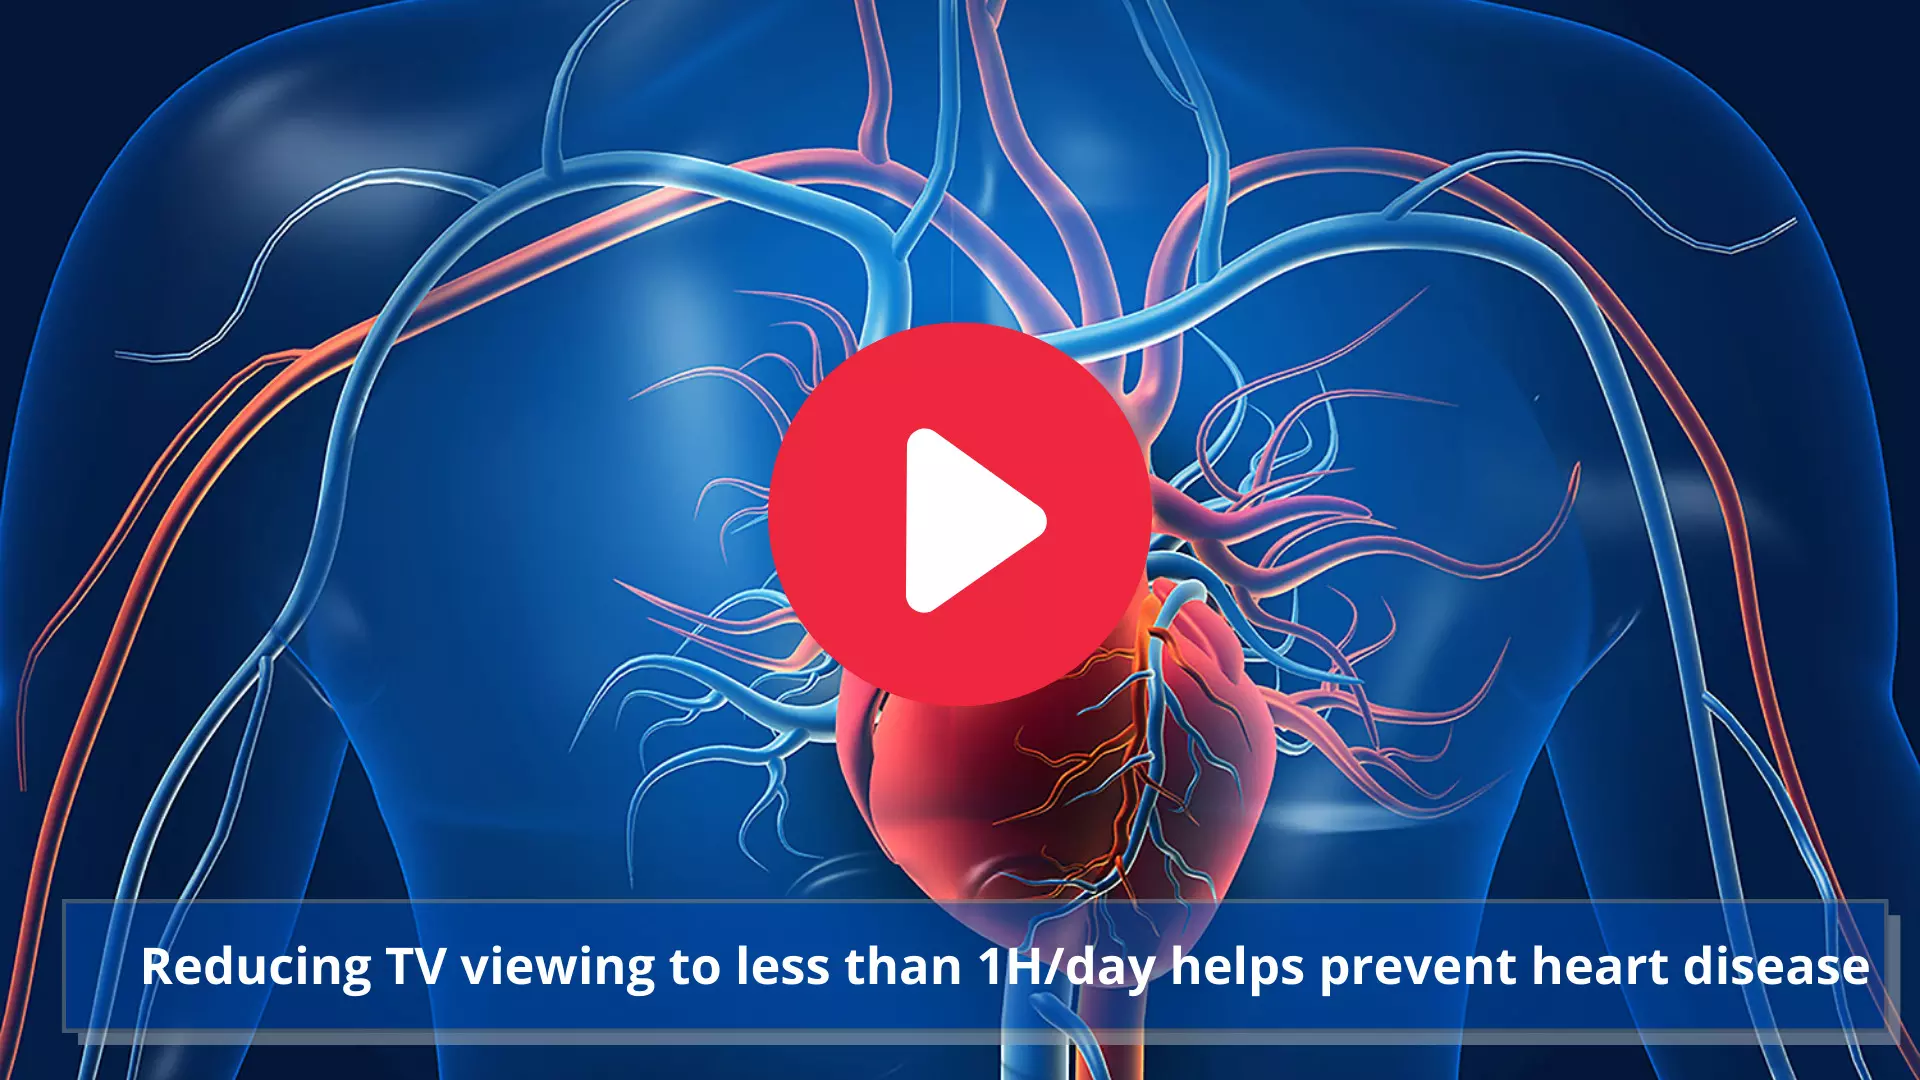 Reducing TV viewing to less than 1H/day helps prevent heart disease